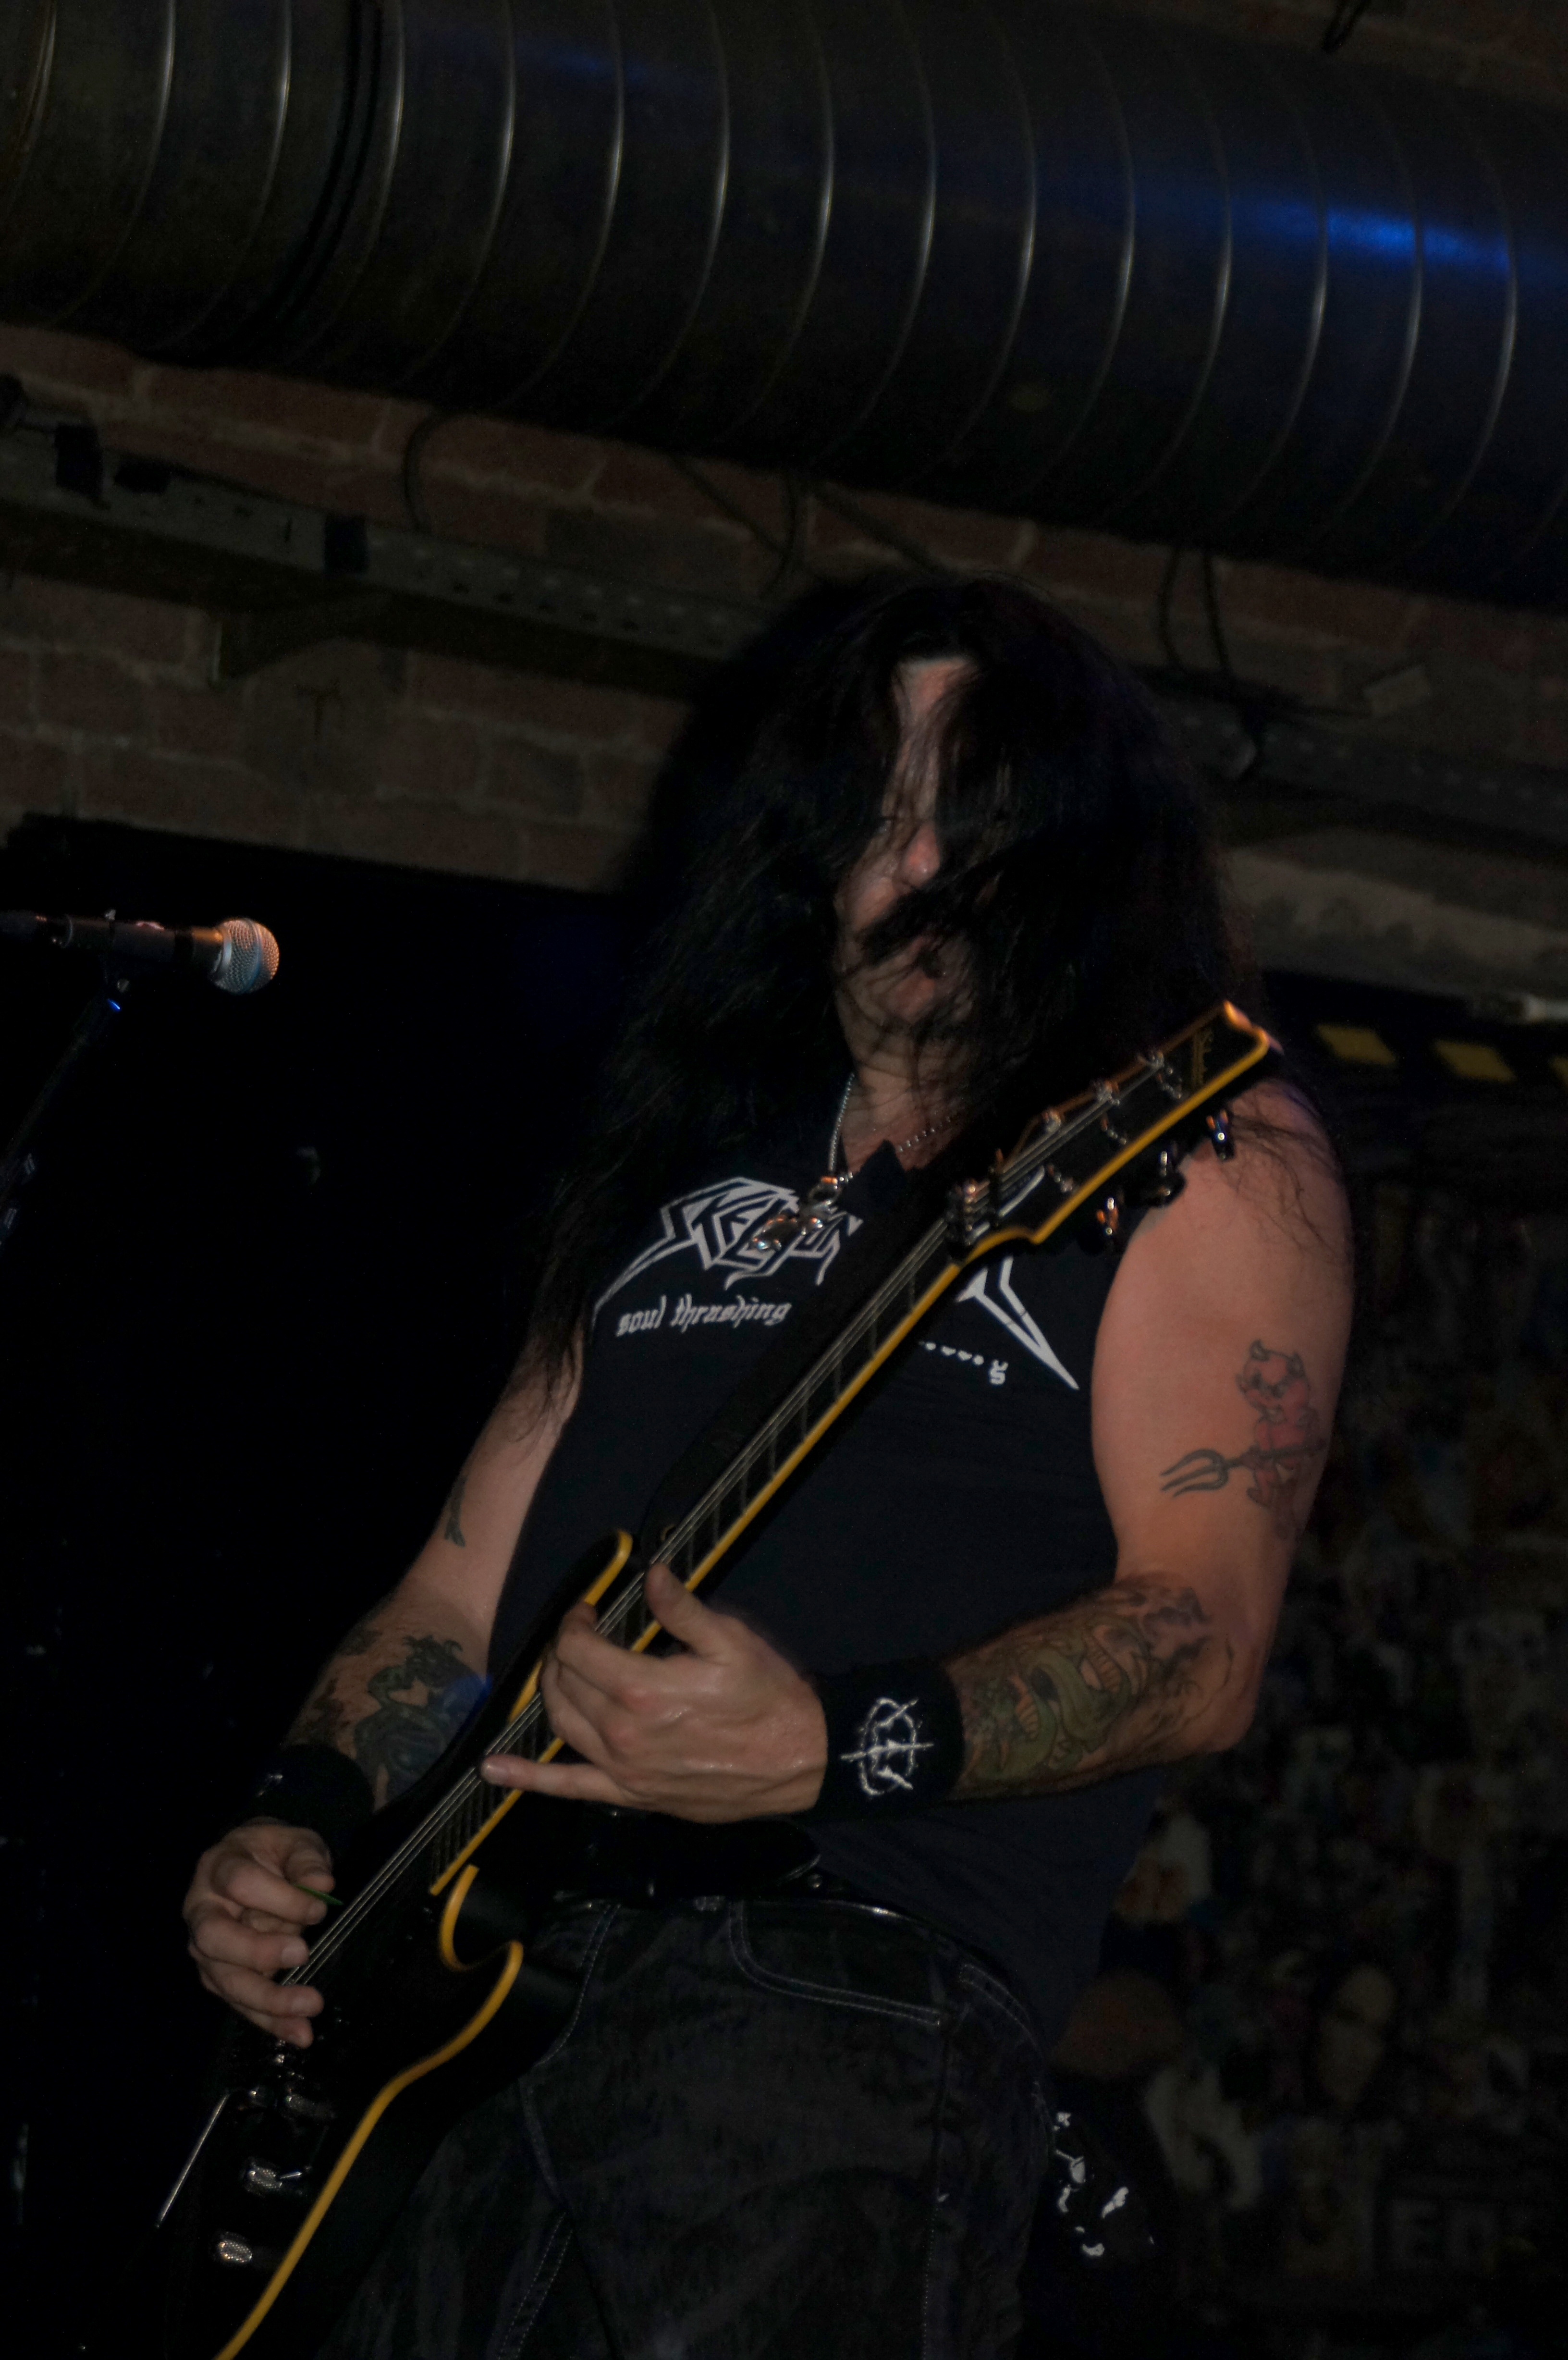 Prong - live in Bochum